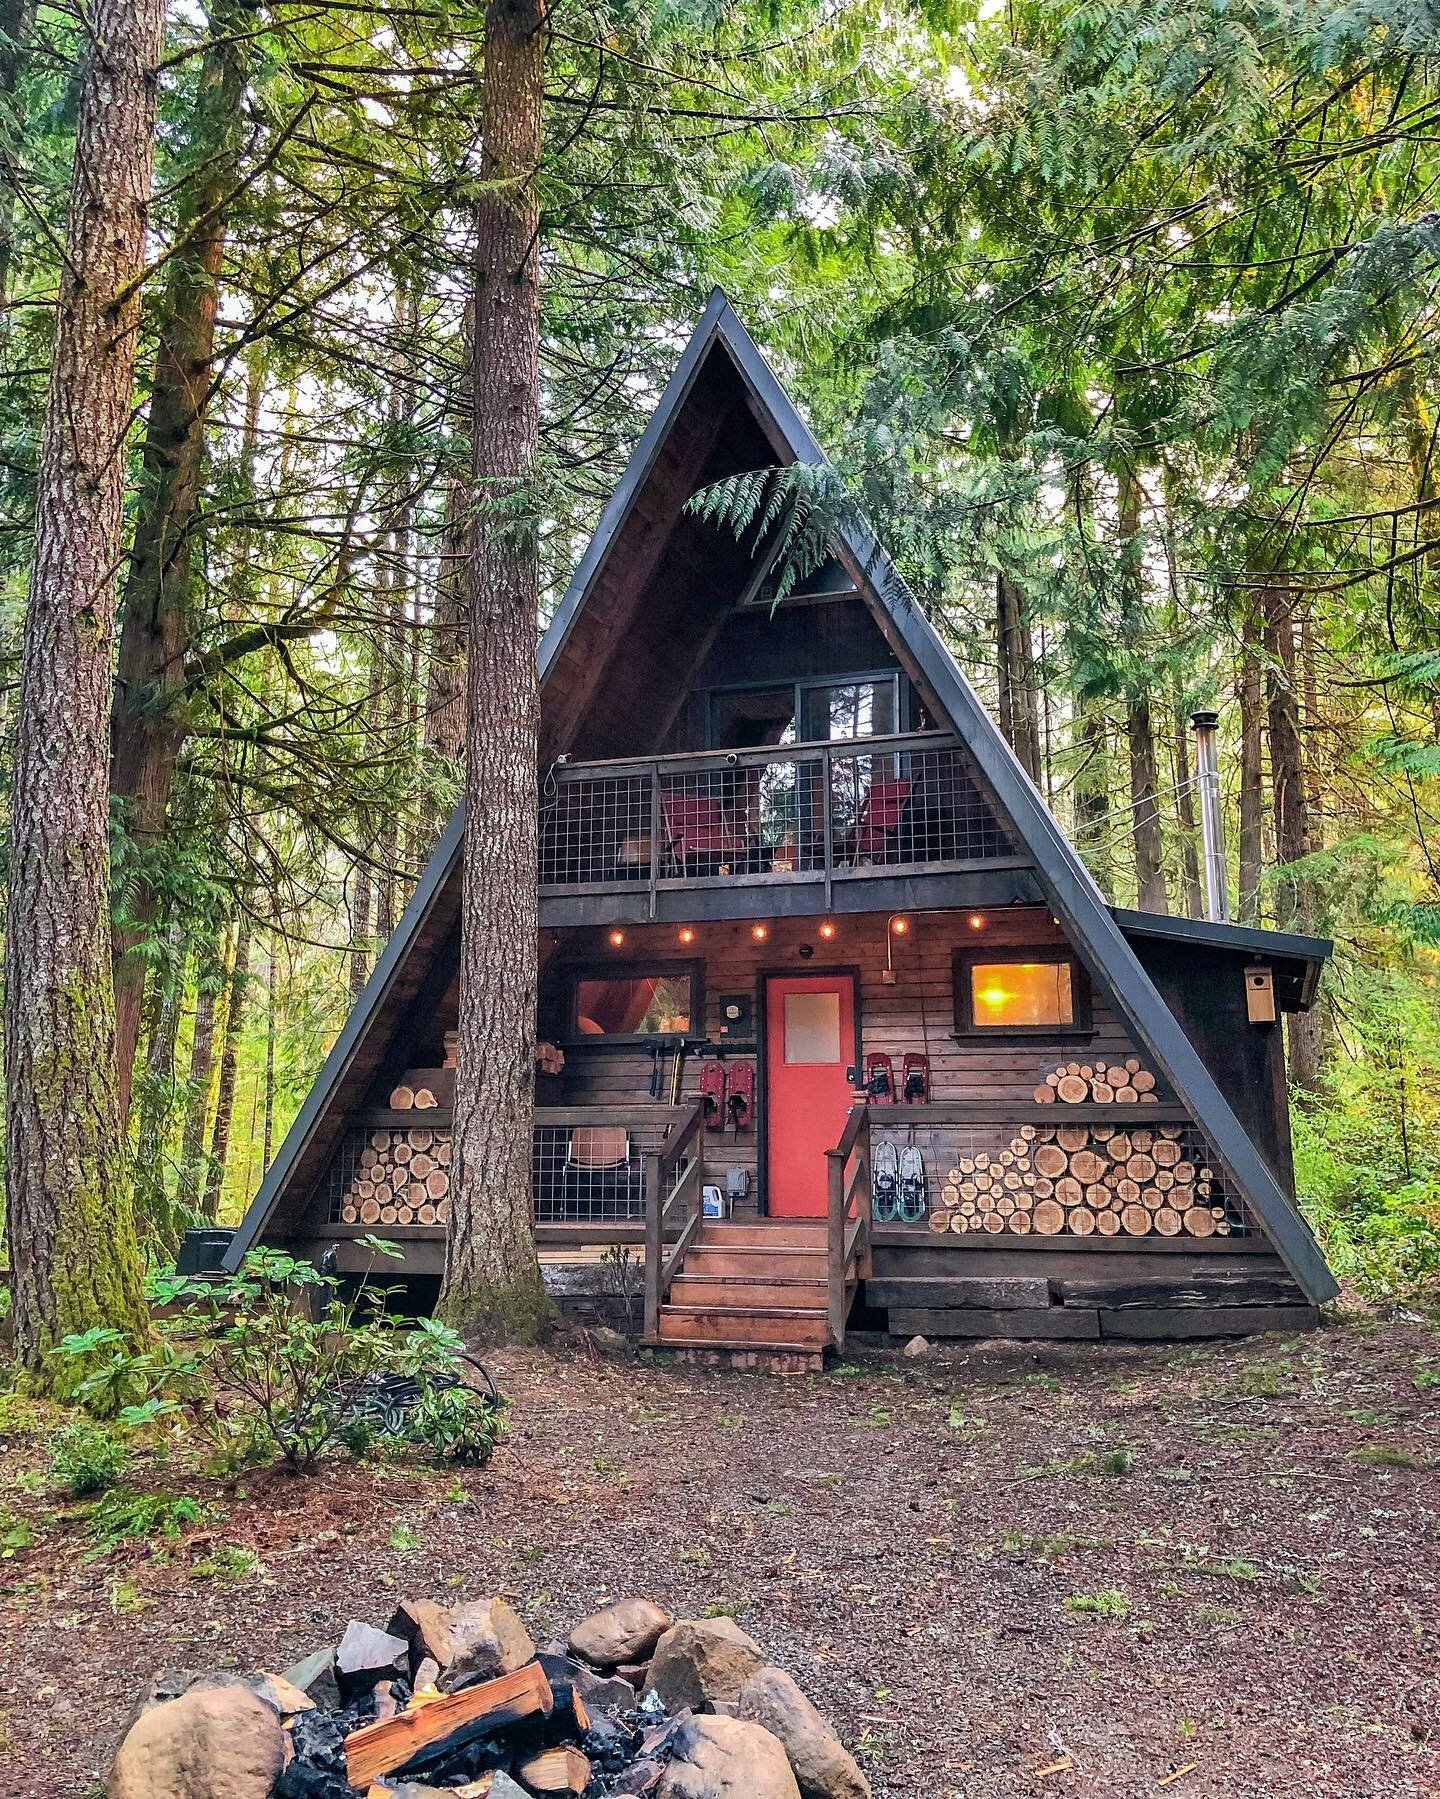 Throwing it back to when we stayed in a dreamy A-frame in the forest after snowshoeing in Mount Rainier National Park 😍 This is definitely one of the best Airbnb&rsquo;s we&rsquo;ve stayed in since moving to the PNW! #snowsoutwest #cabinlife #pnwond